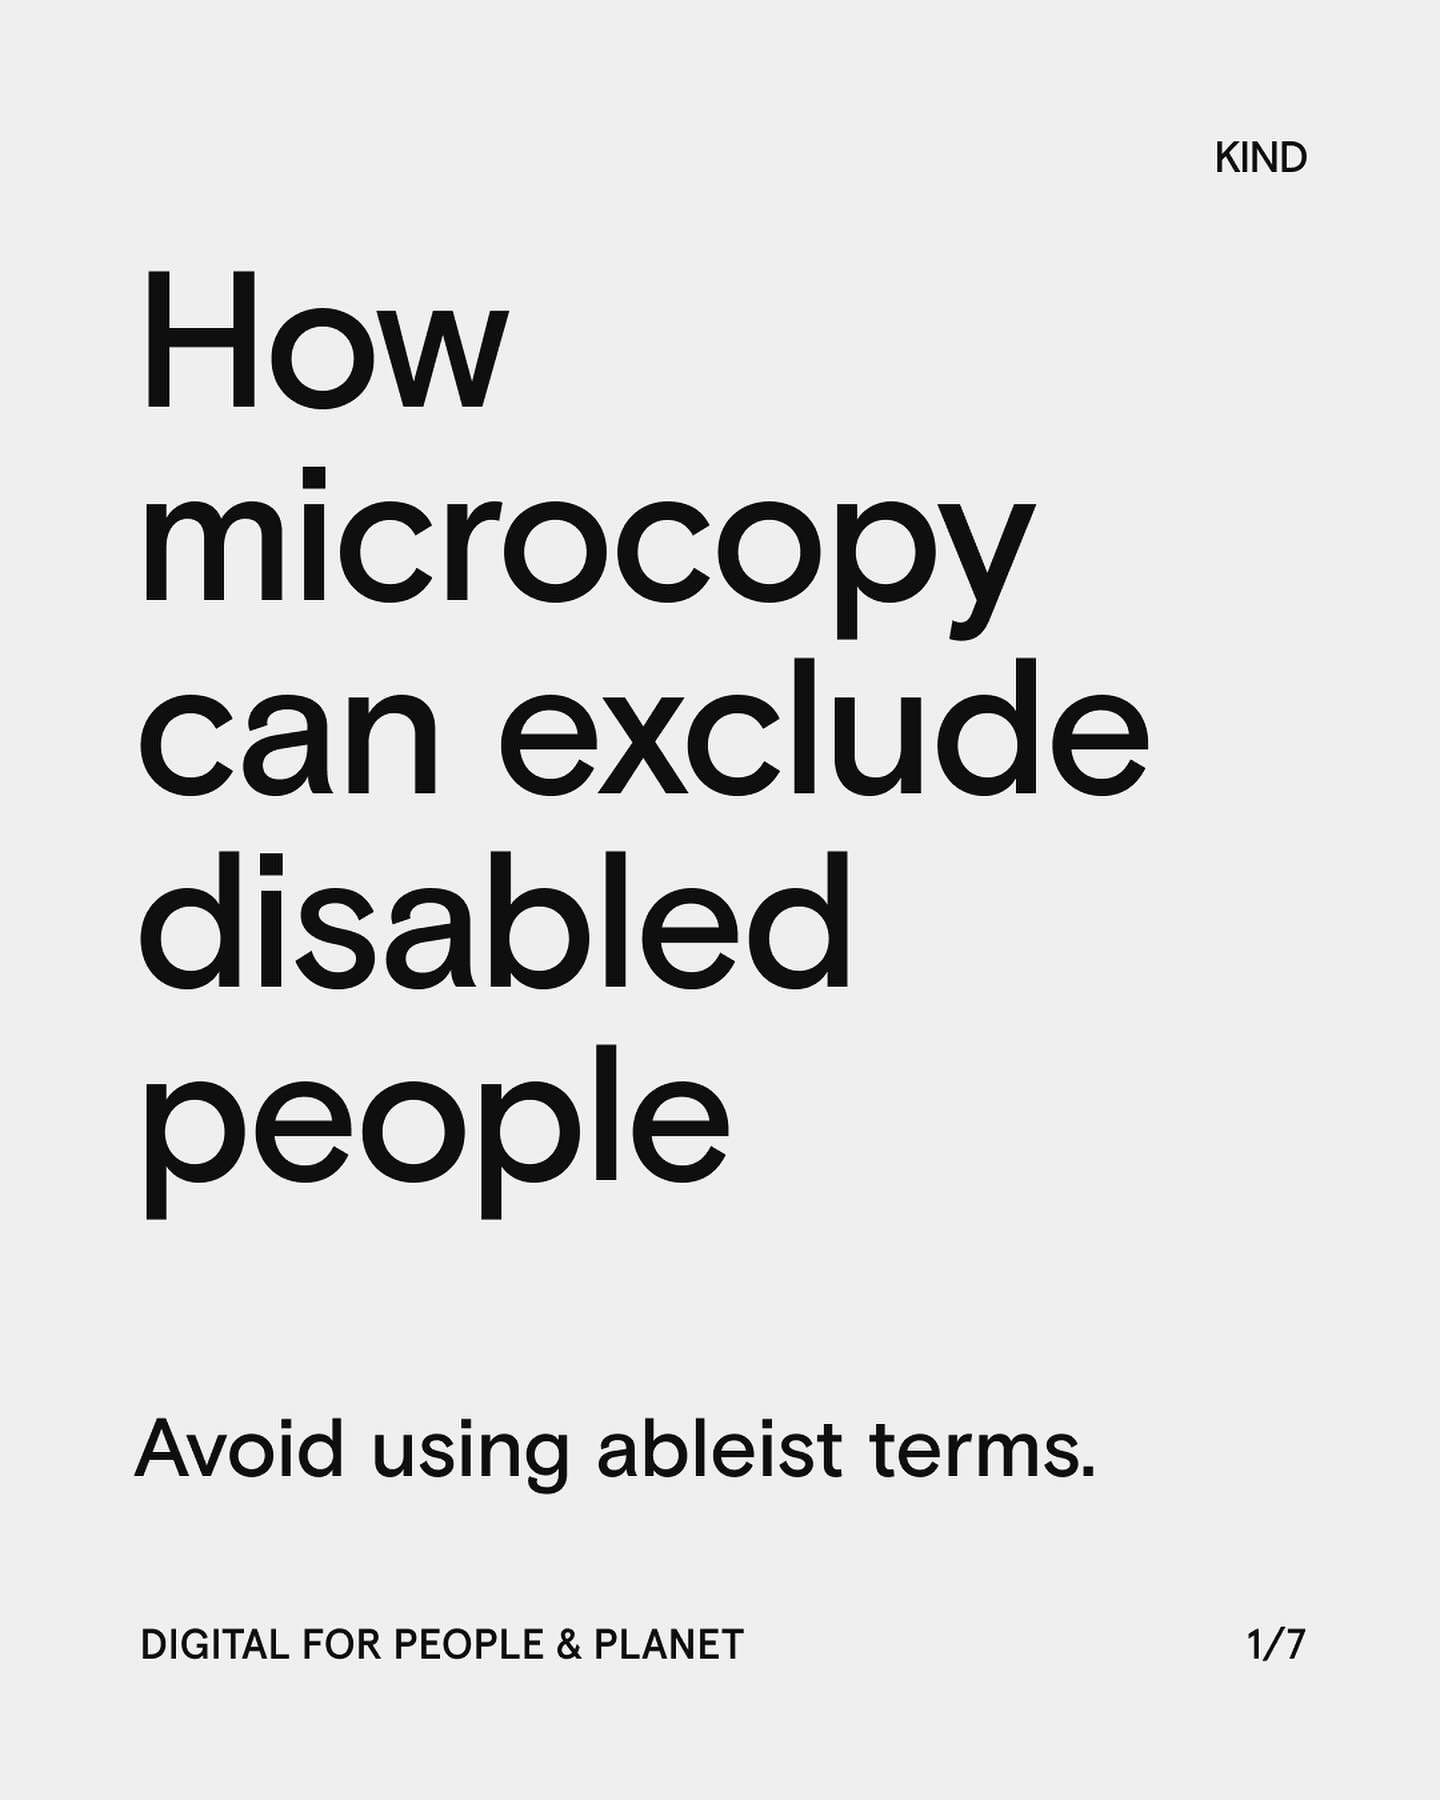 How microcopy can exclude disabled people? When it uses words that assume everyone has the same abilities. 

We all have an unconscious bias, that left unchallenged will lead us to create experiences for people who are &lsquo;like us&rsquo;. Unfortun